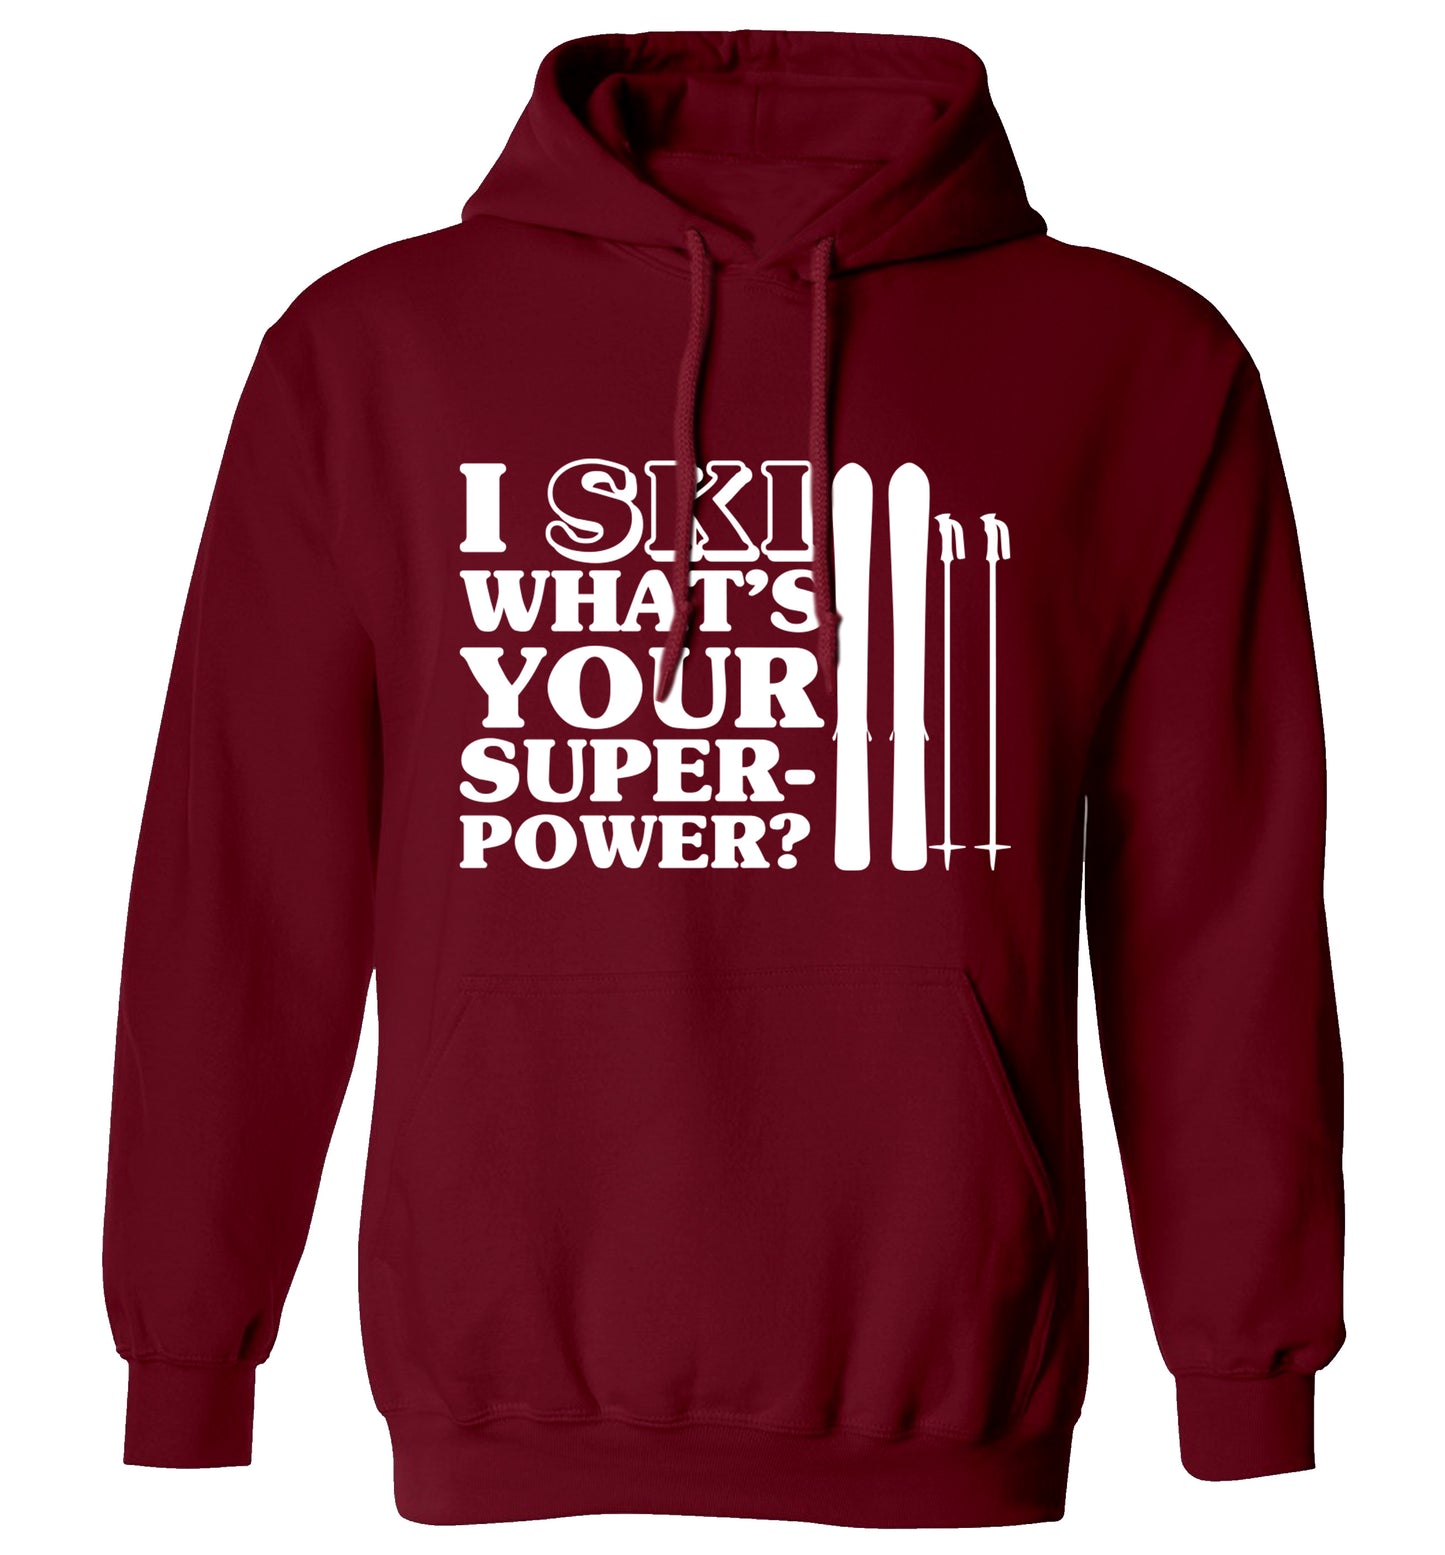 I ski what's your superpower? adults unisexmaroon hoodie 2XL